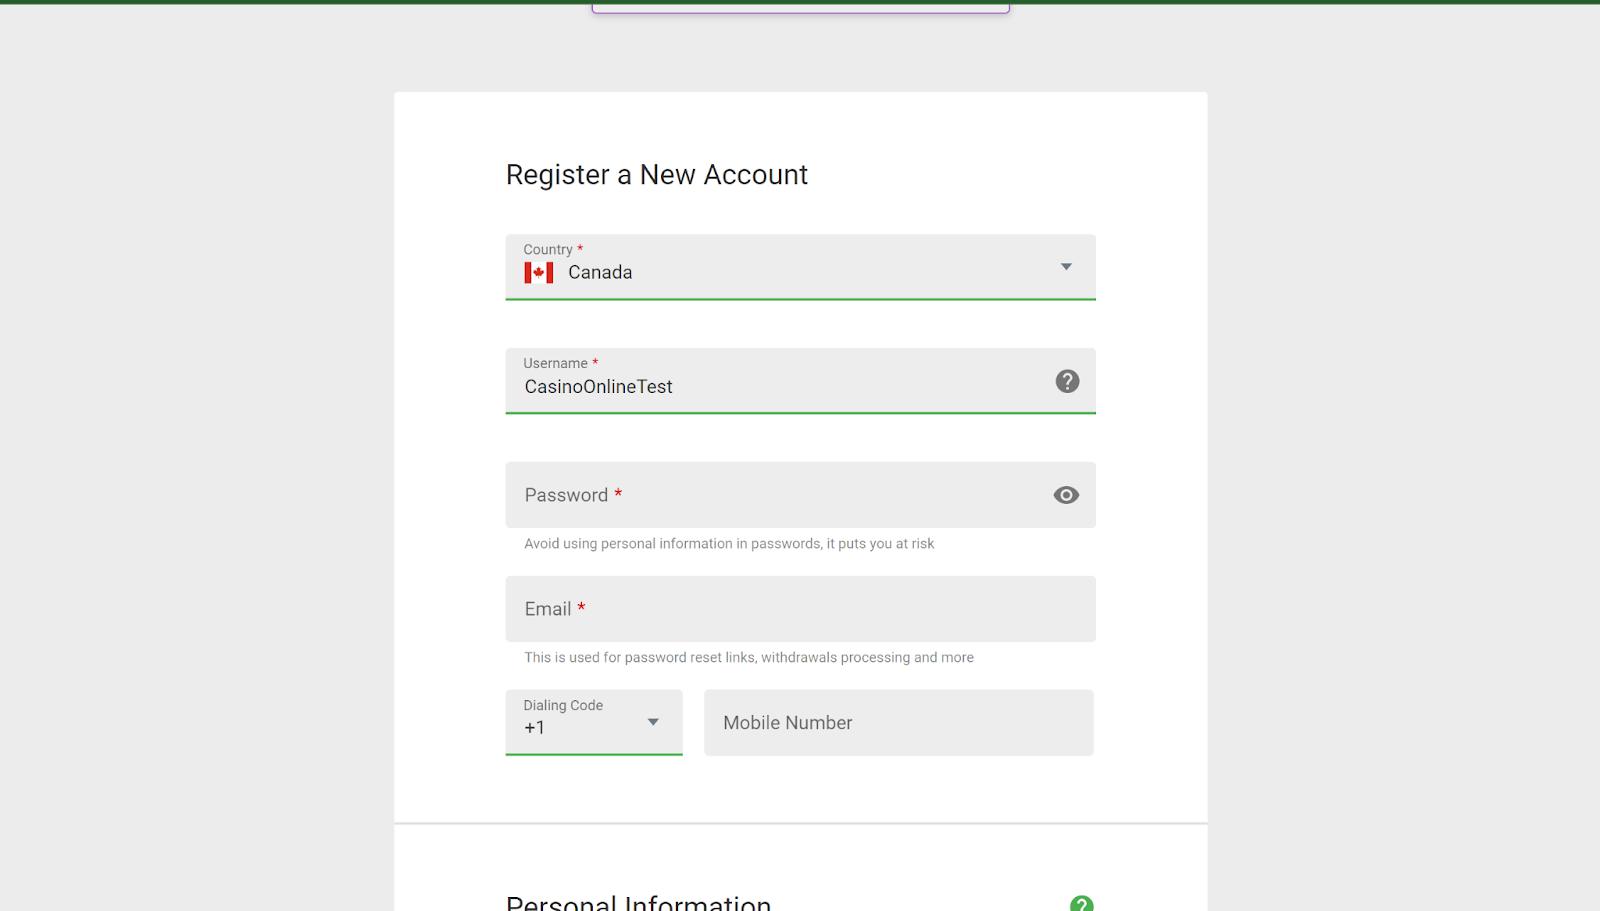 Ruby Fortune’s Registration Form